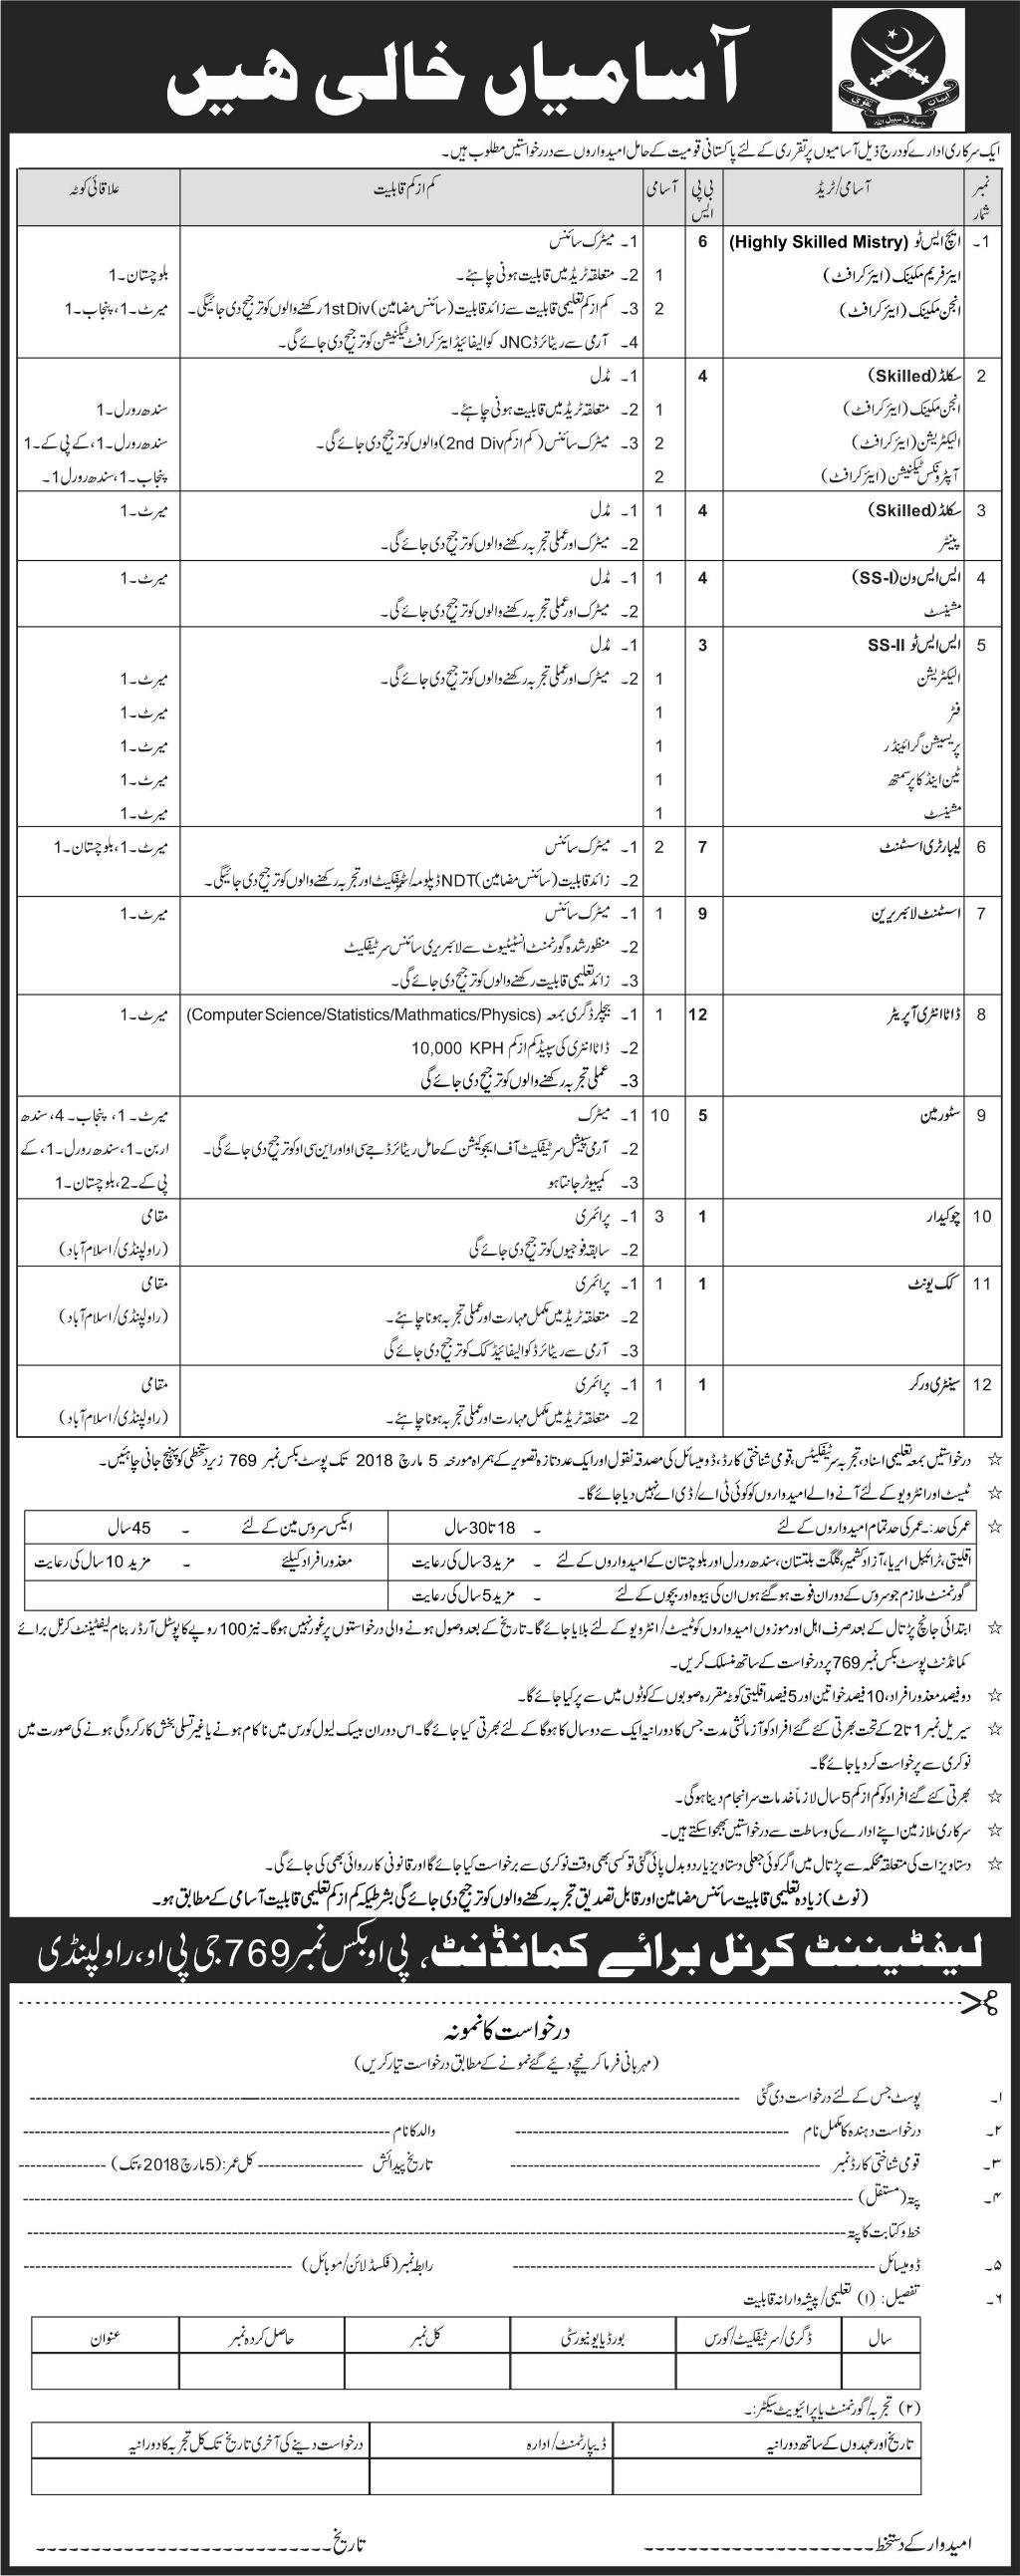 Job Opportunity in Pak Army, 20th February 2018 Daily Express Newspaper